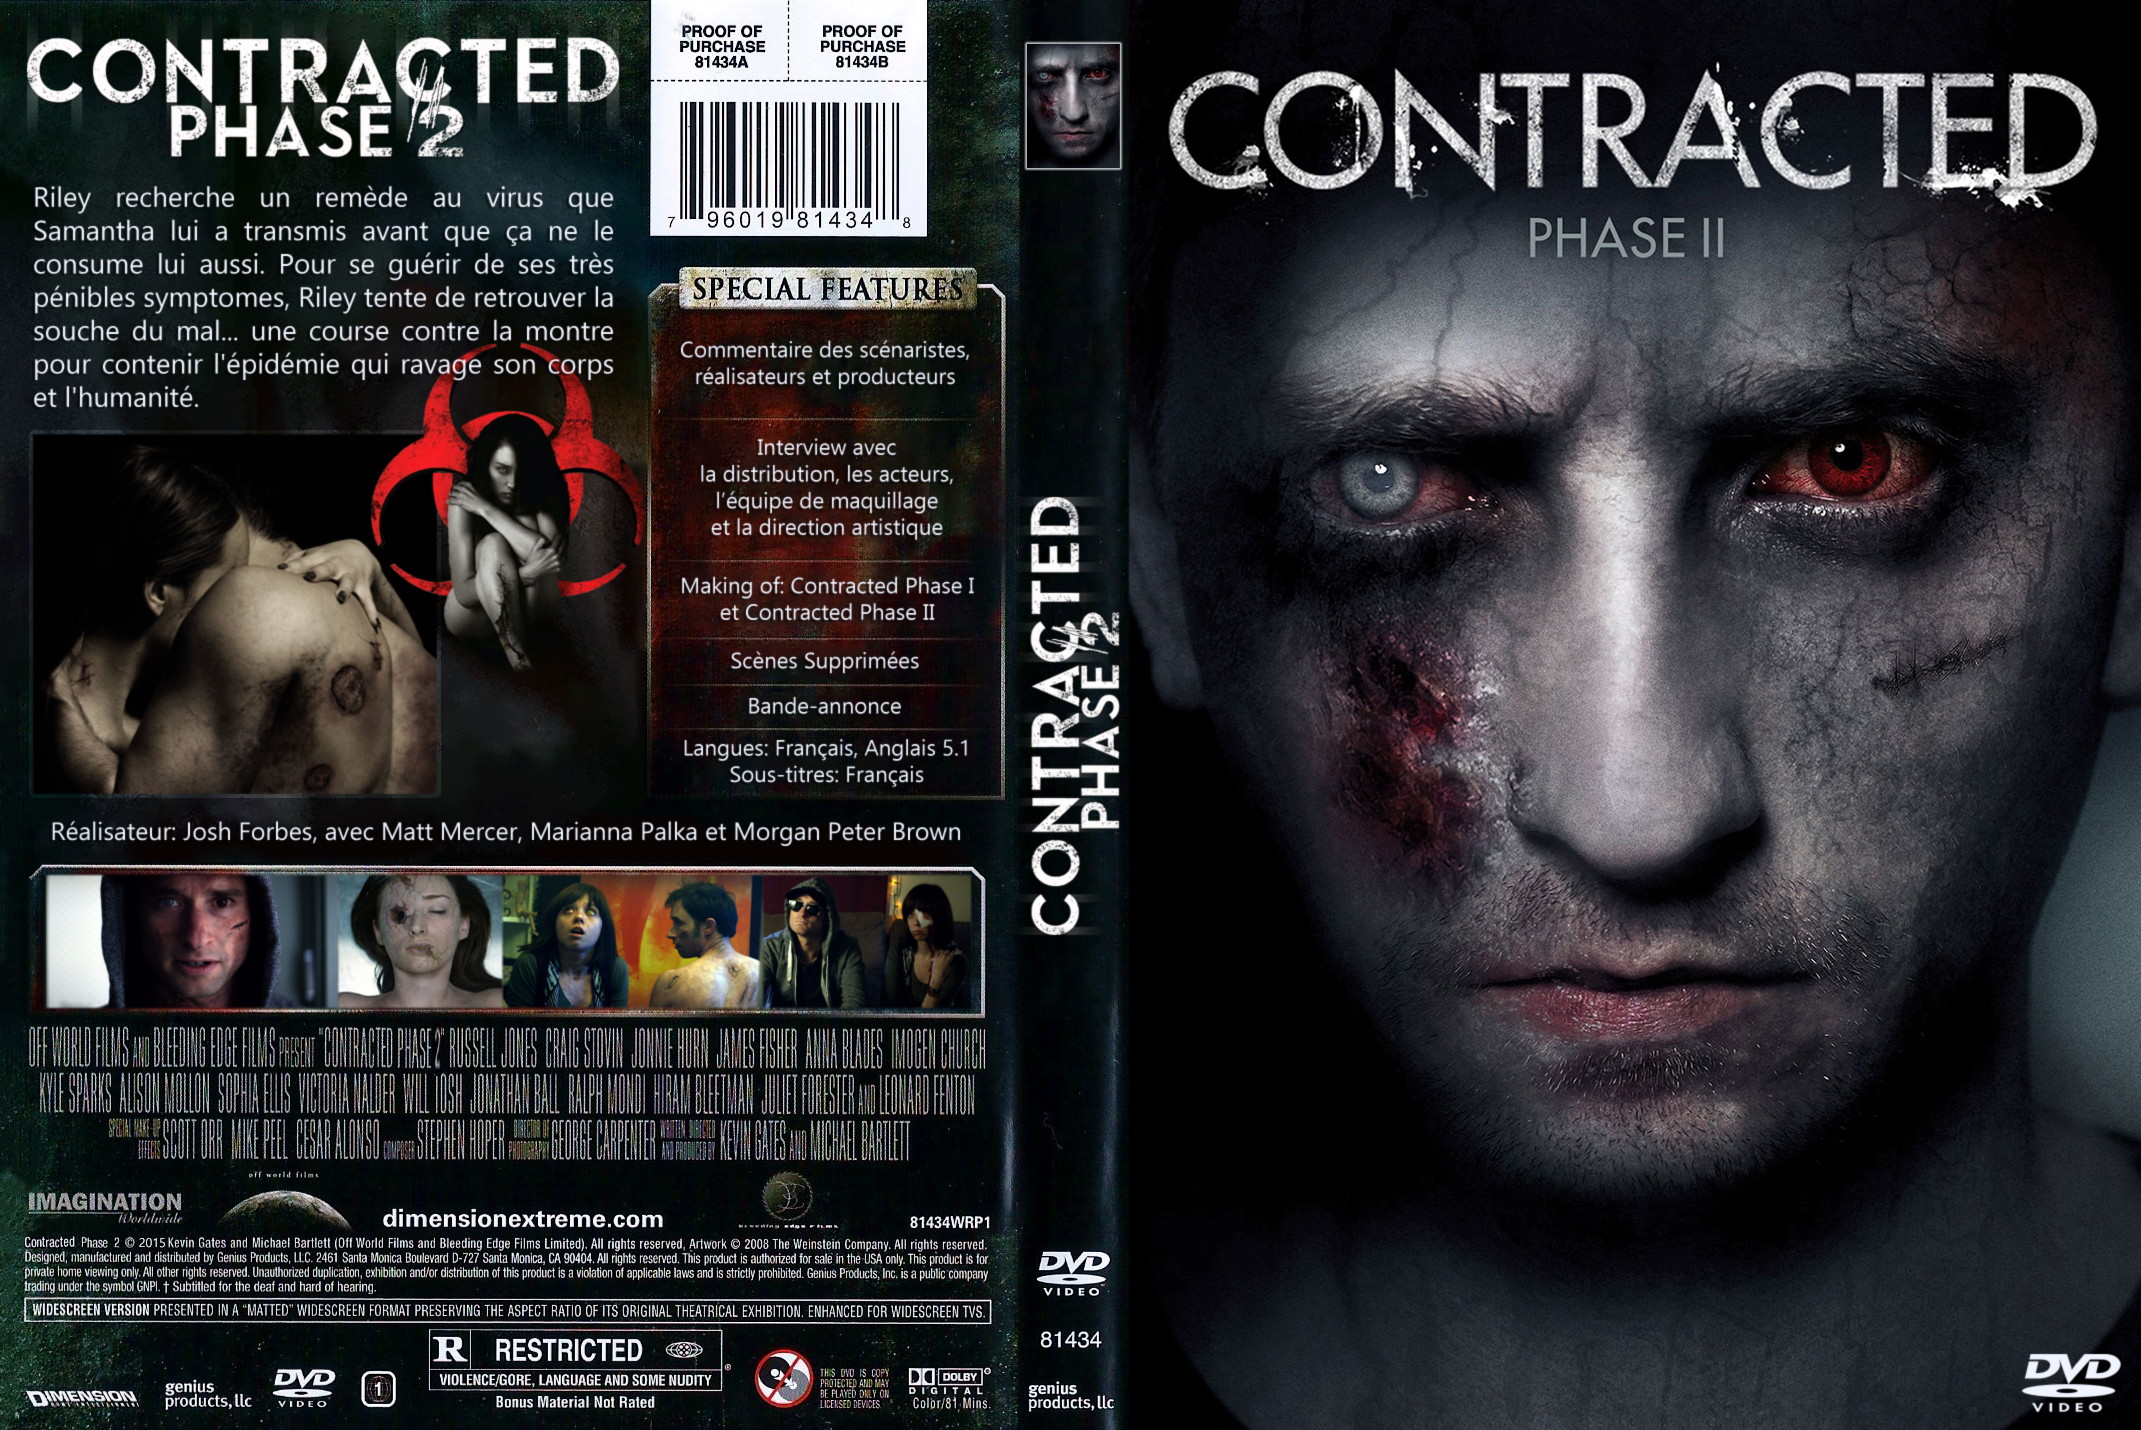 Jaquette DVD Contracted Phase 2 (Canadienne)